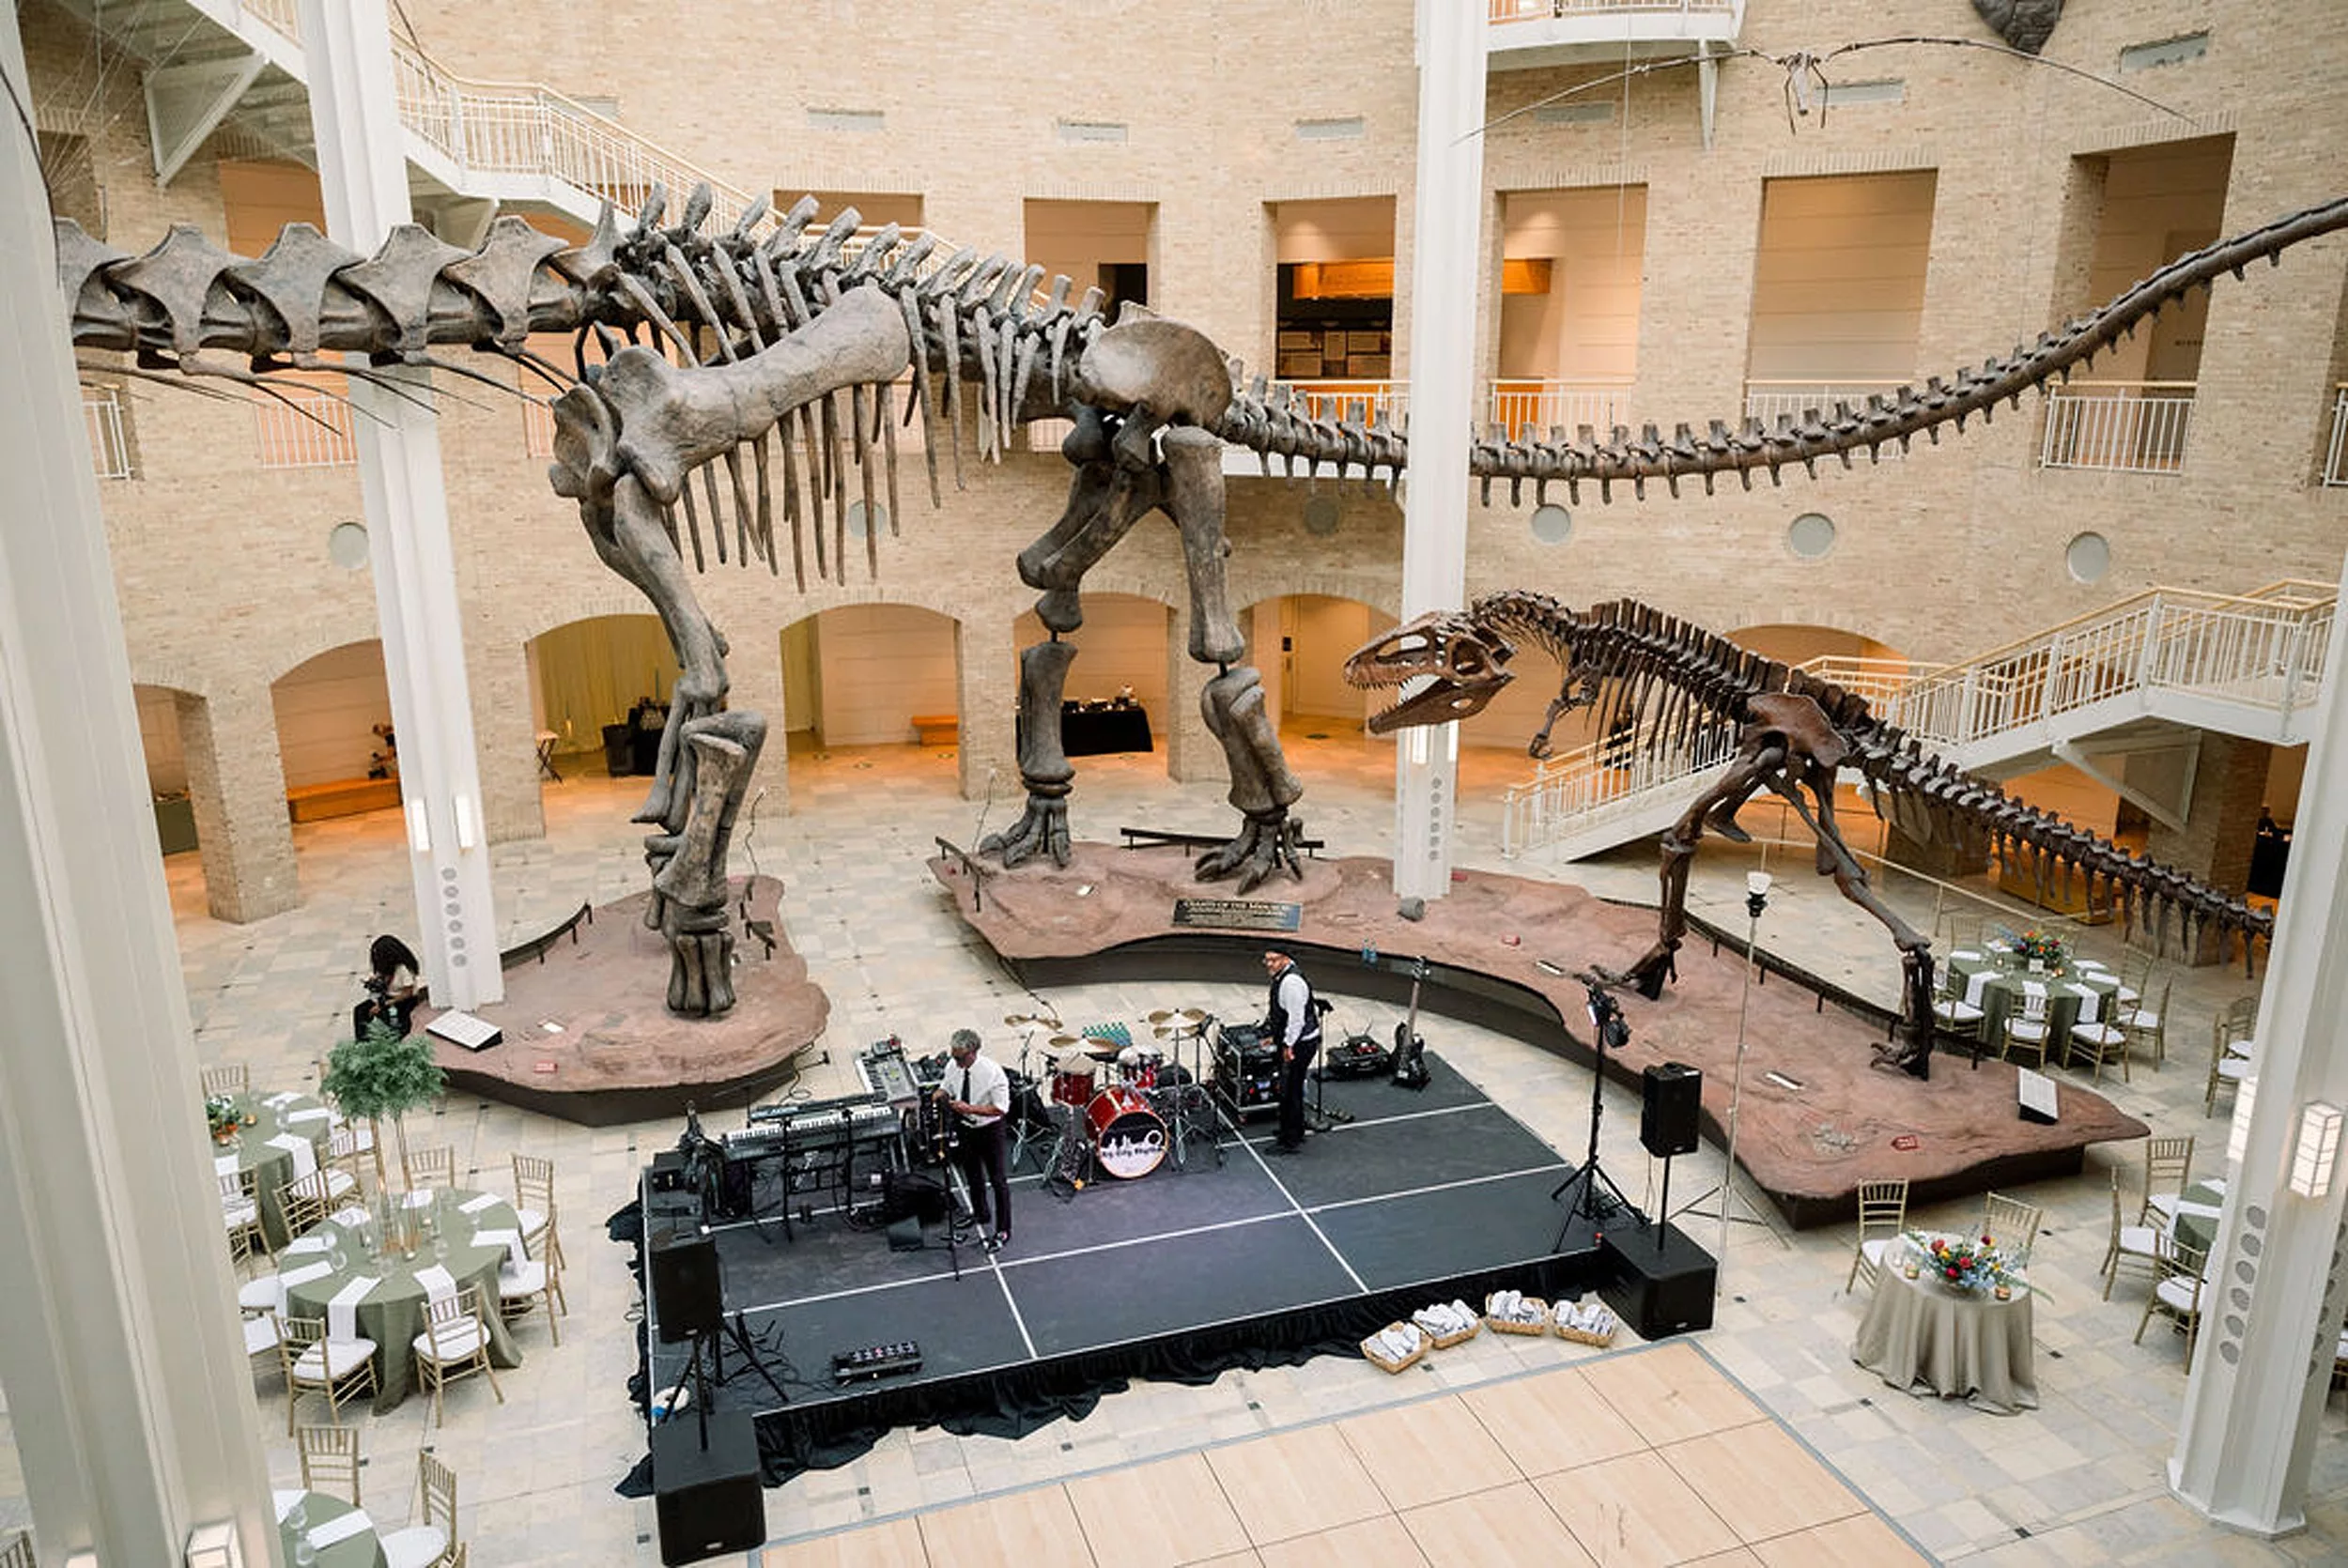 Above view of two dinosaur skeletons walking around wedding reception table and a band on a stage at a jurassic park wedding